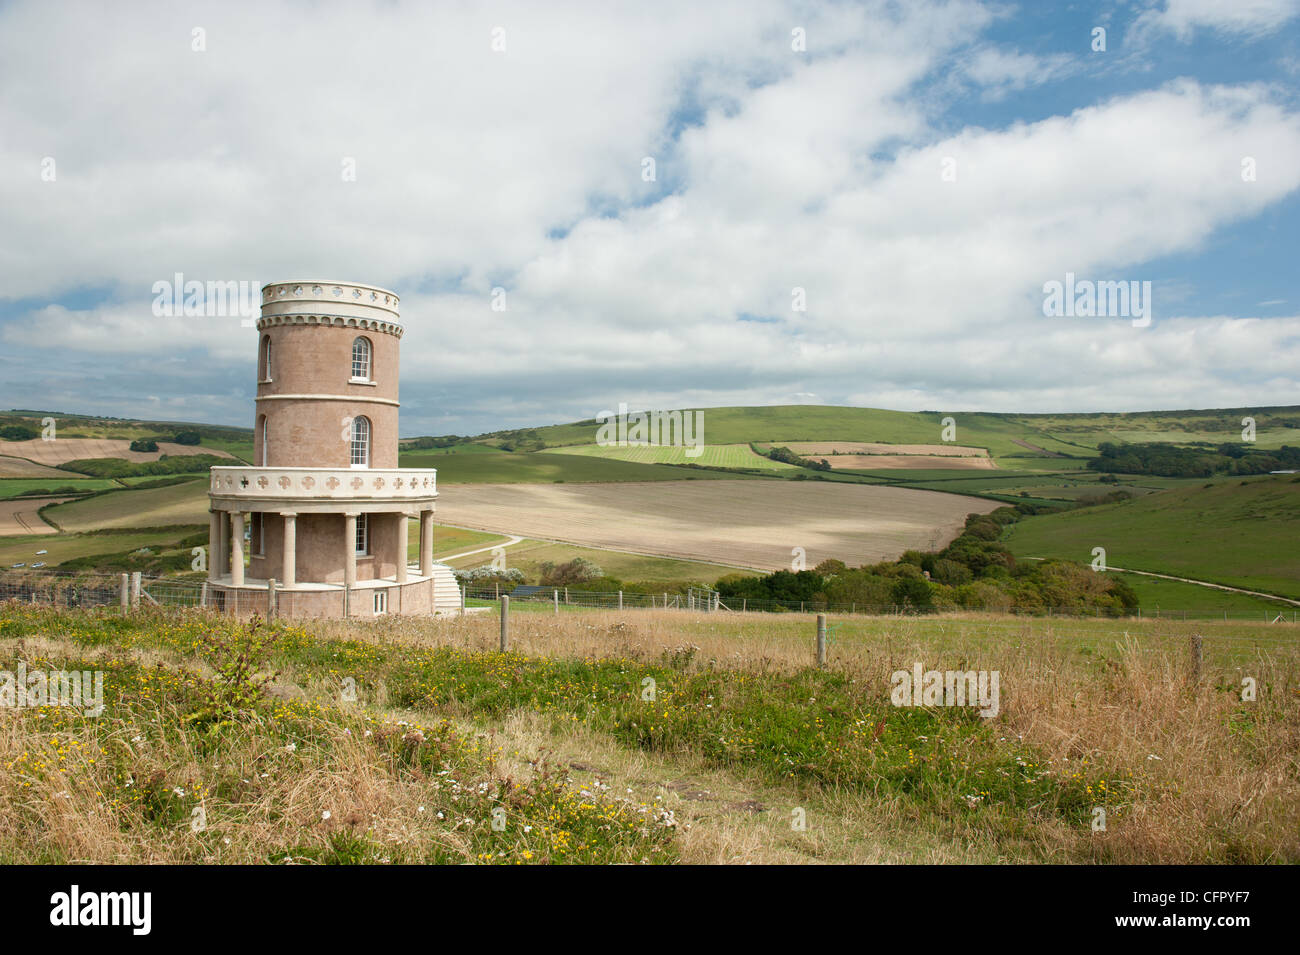 Clavell Tower on Hen Cliff in Kimmeridge bay, Dorset, which was called the Black Tower in the P.D. James novel of the same name Stock Photo